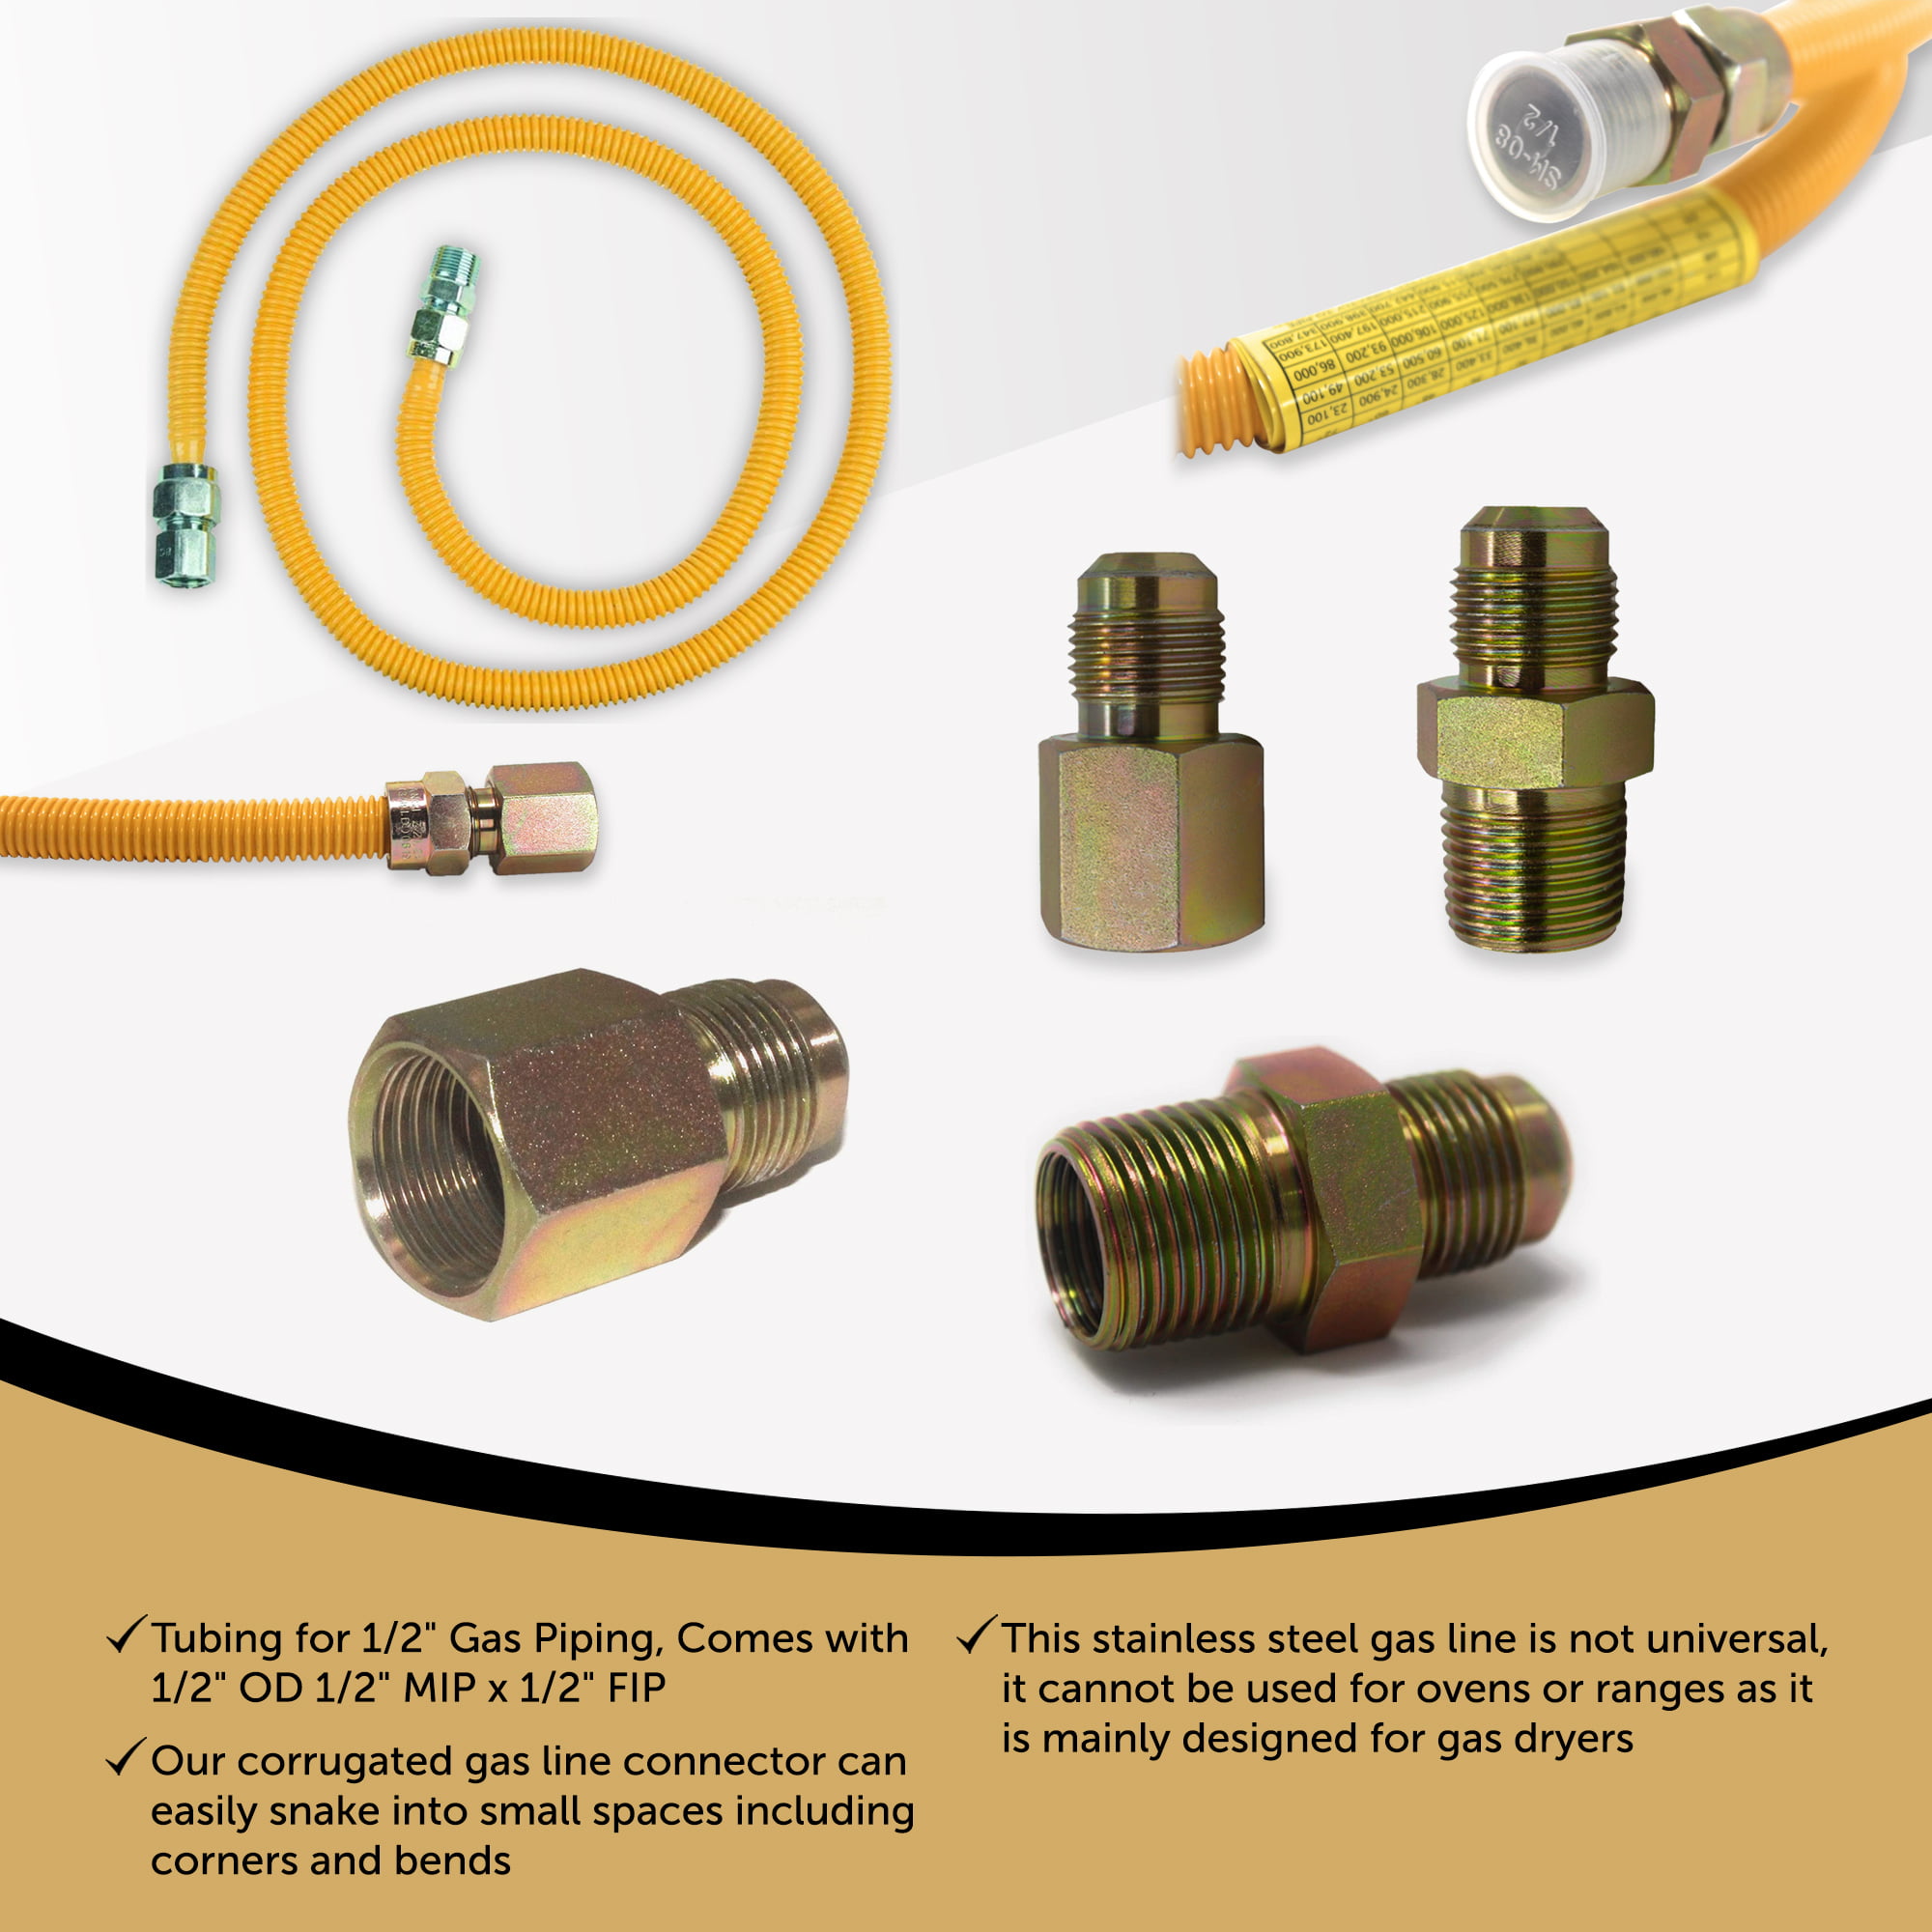 Appliance Pros Flexible Stainless Steel Gas Line for Dryer, Gas Hose  Connector Kit, Comes with 1/2 OD 1/2 MIP x 1/2 FIP, Stainless Steel  (GASLINE72) 